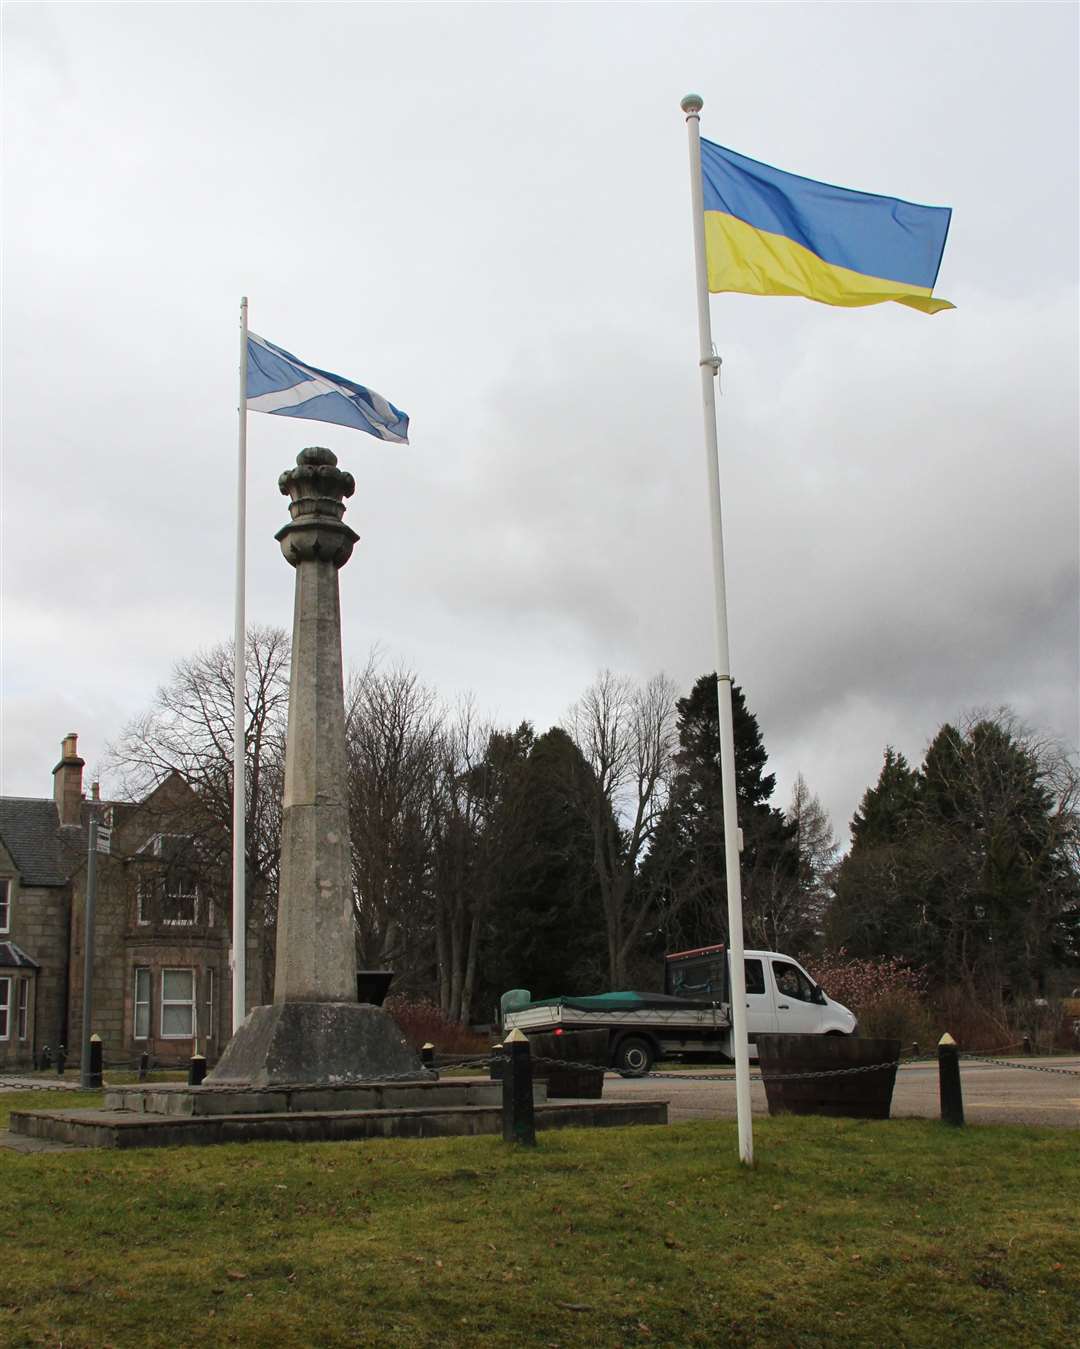 Solidarity: the saltire and the Ukrainian flag stand together in The Square at Grantown